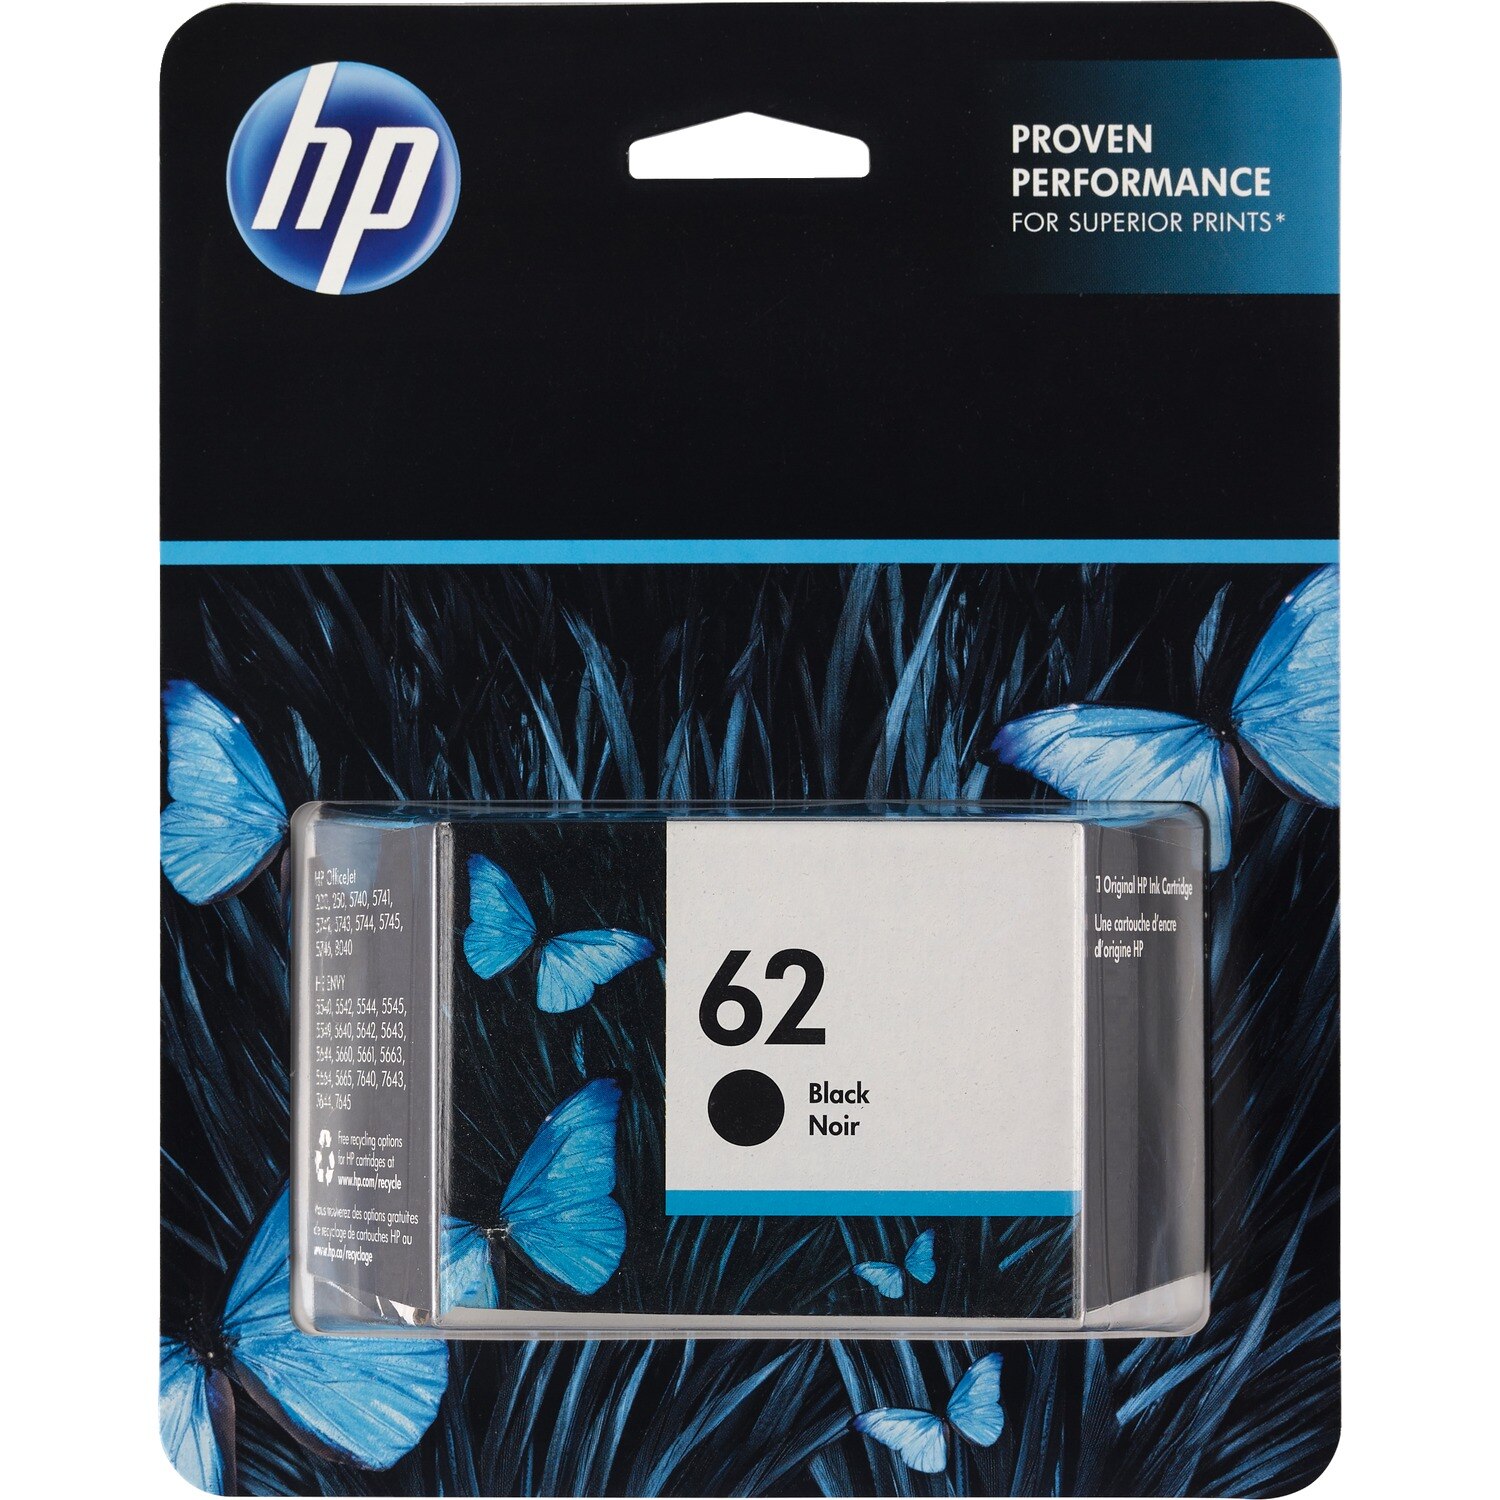 Faculteit Overblijvend Petulance HP Ink Cartridge, 62 Black | Pick Up In Store TODAY at CVS